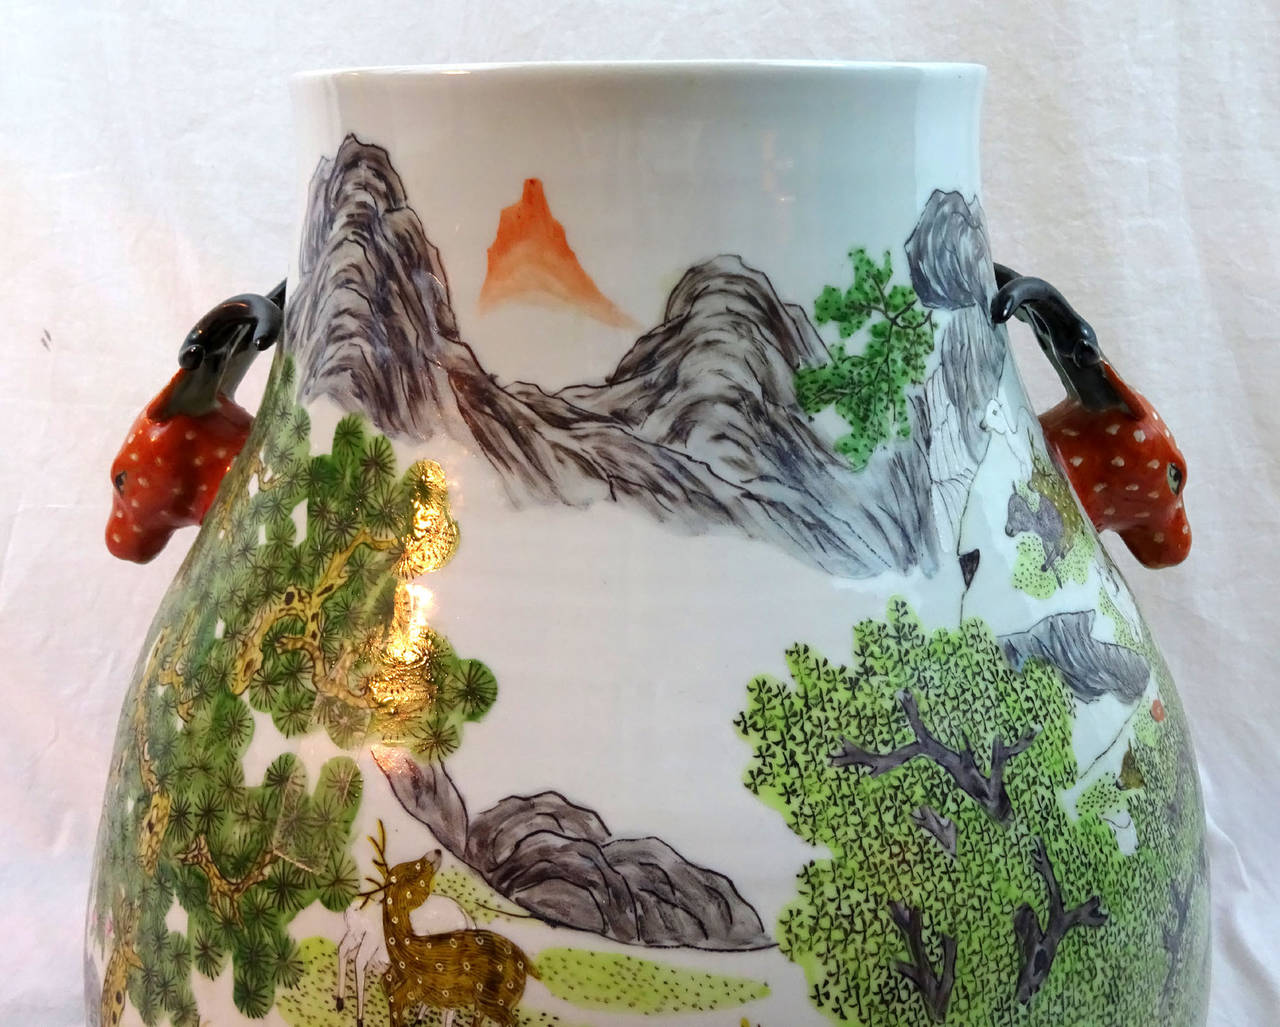 20th century Chinese porcelain jar with red deer head handles and a painted depiction of a nature scene, modeled after the antique.